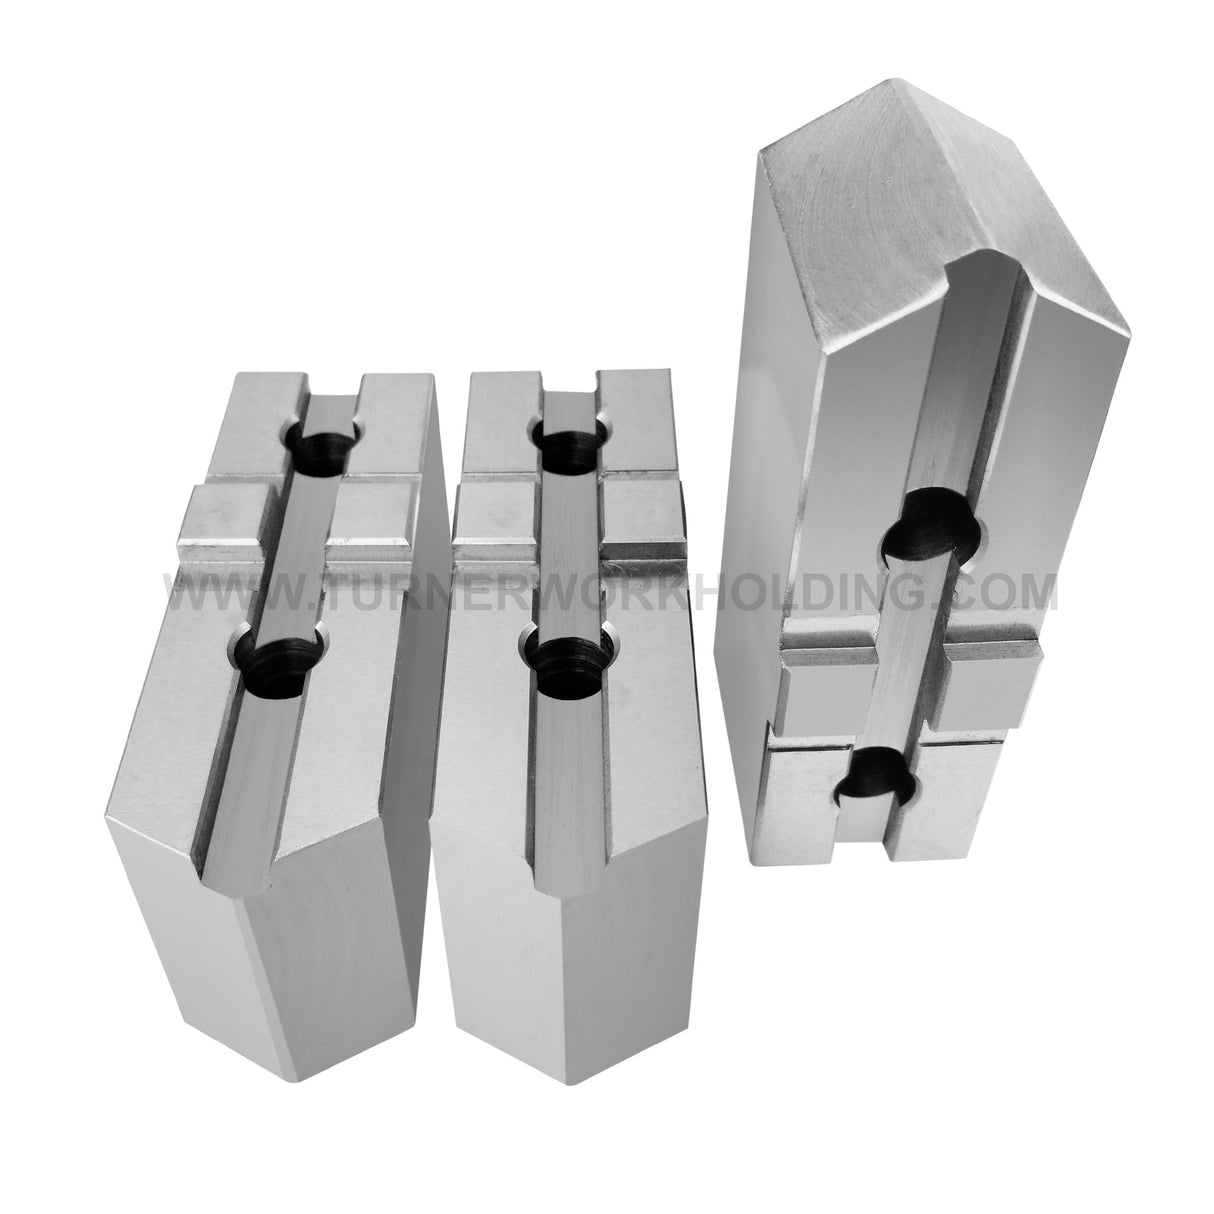 TG-8C-2.5-SP - AMERICAN STANDARD STEEL SOFT JAWS FOR TONGUE & GROOVE 8" CHUCK 2.5" HT (3 PC SET)